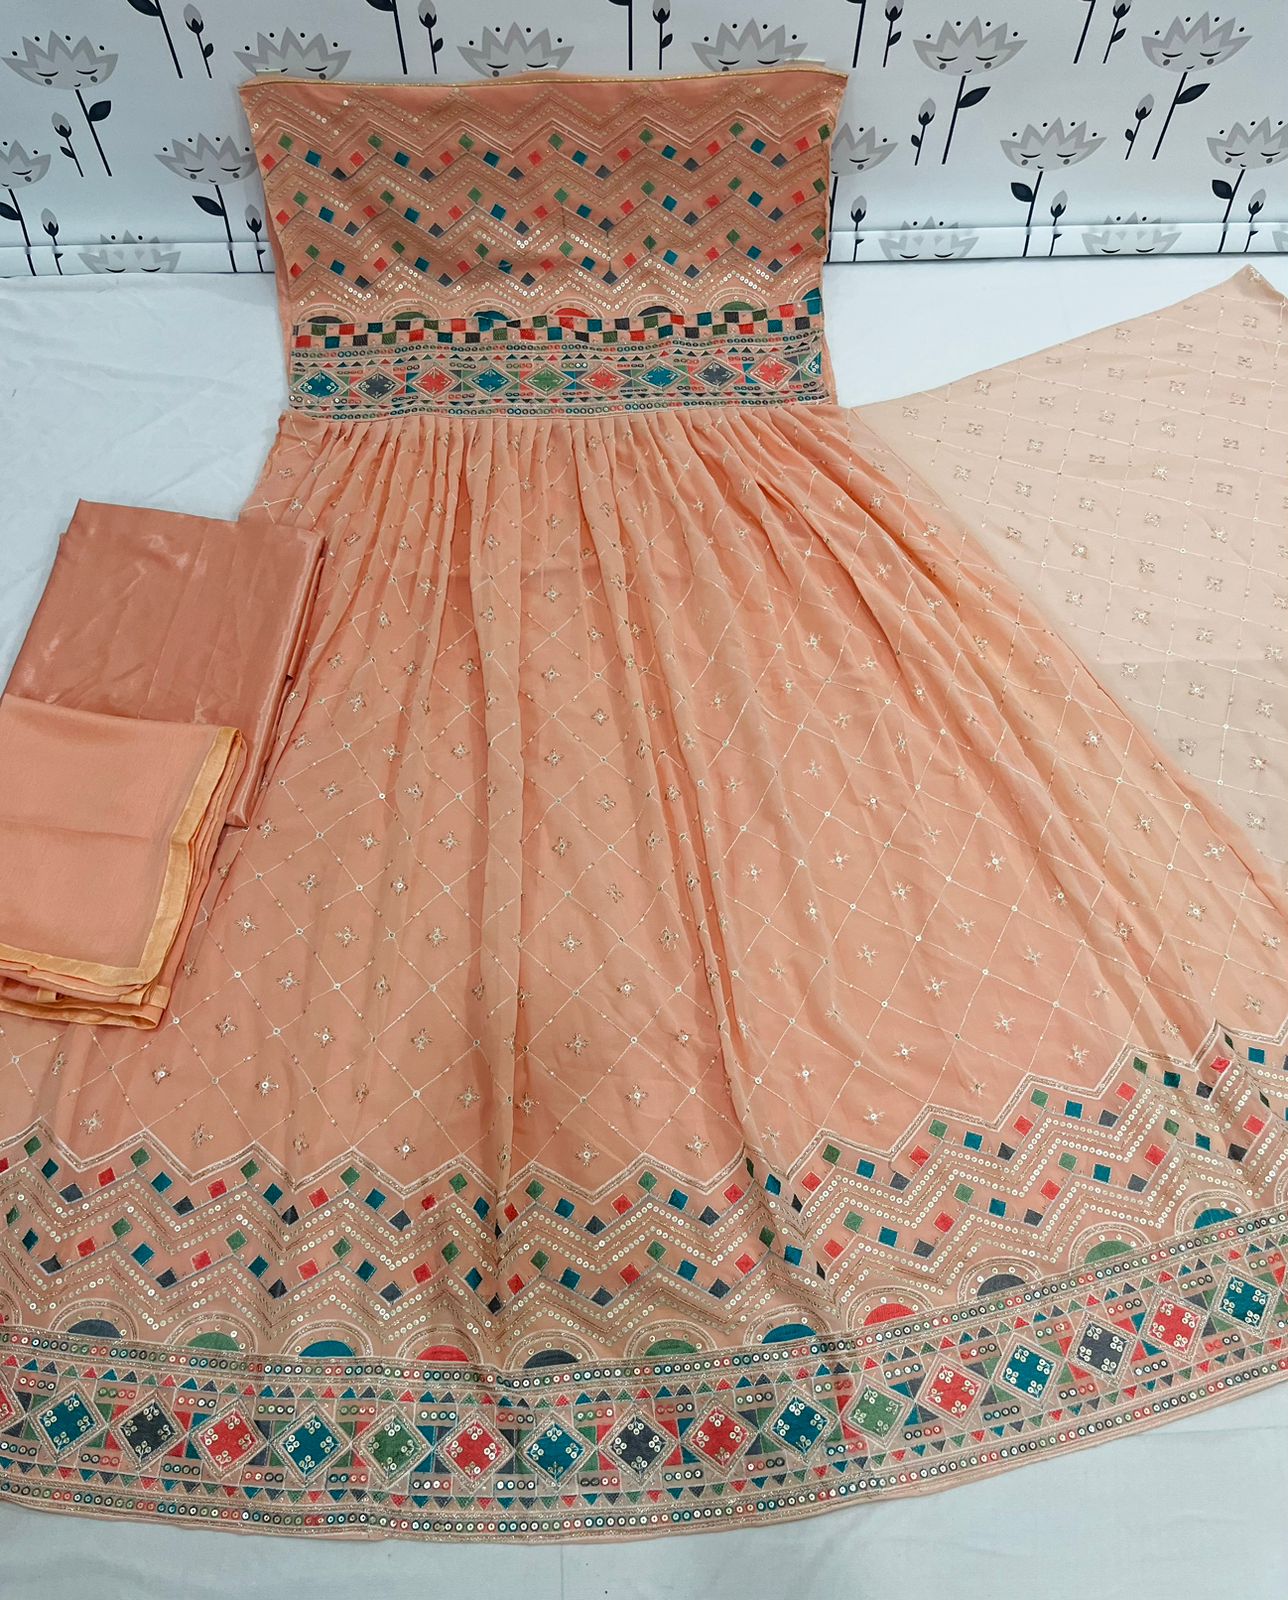 Peach Color Faux Georgette Heavy Embroidery Work Gown Anarkali Salwar Suit